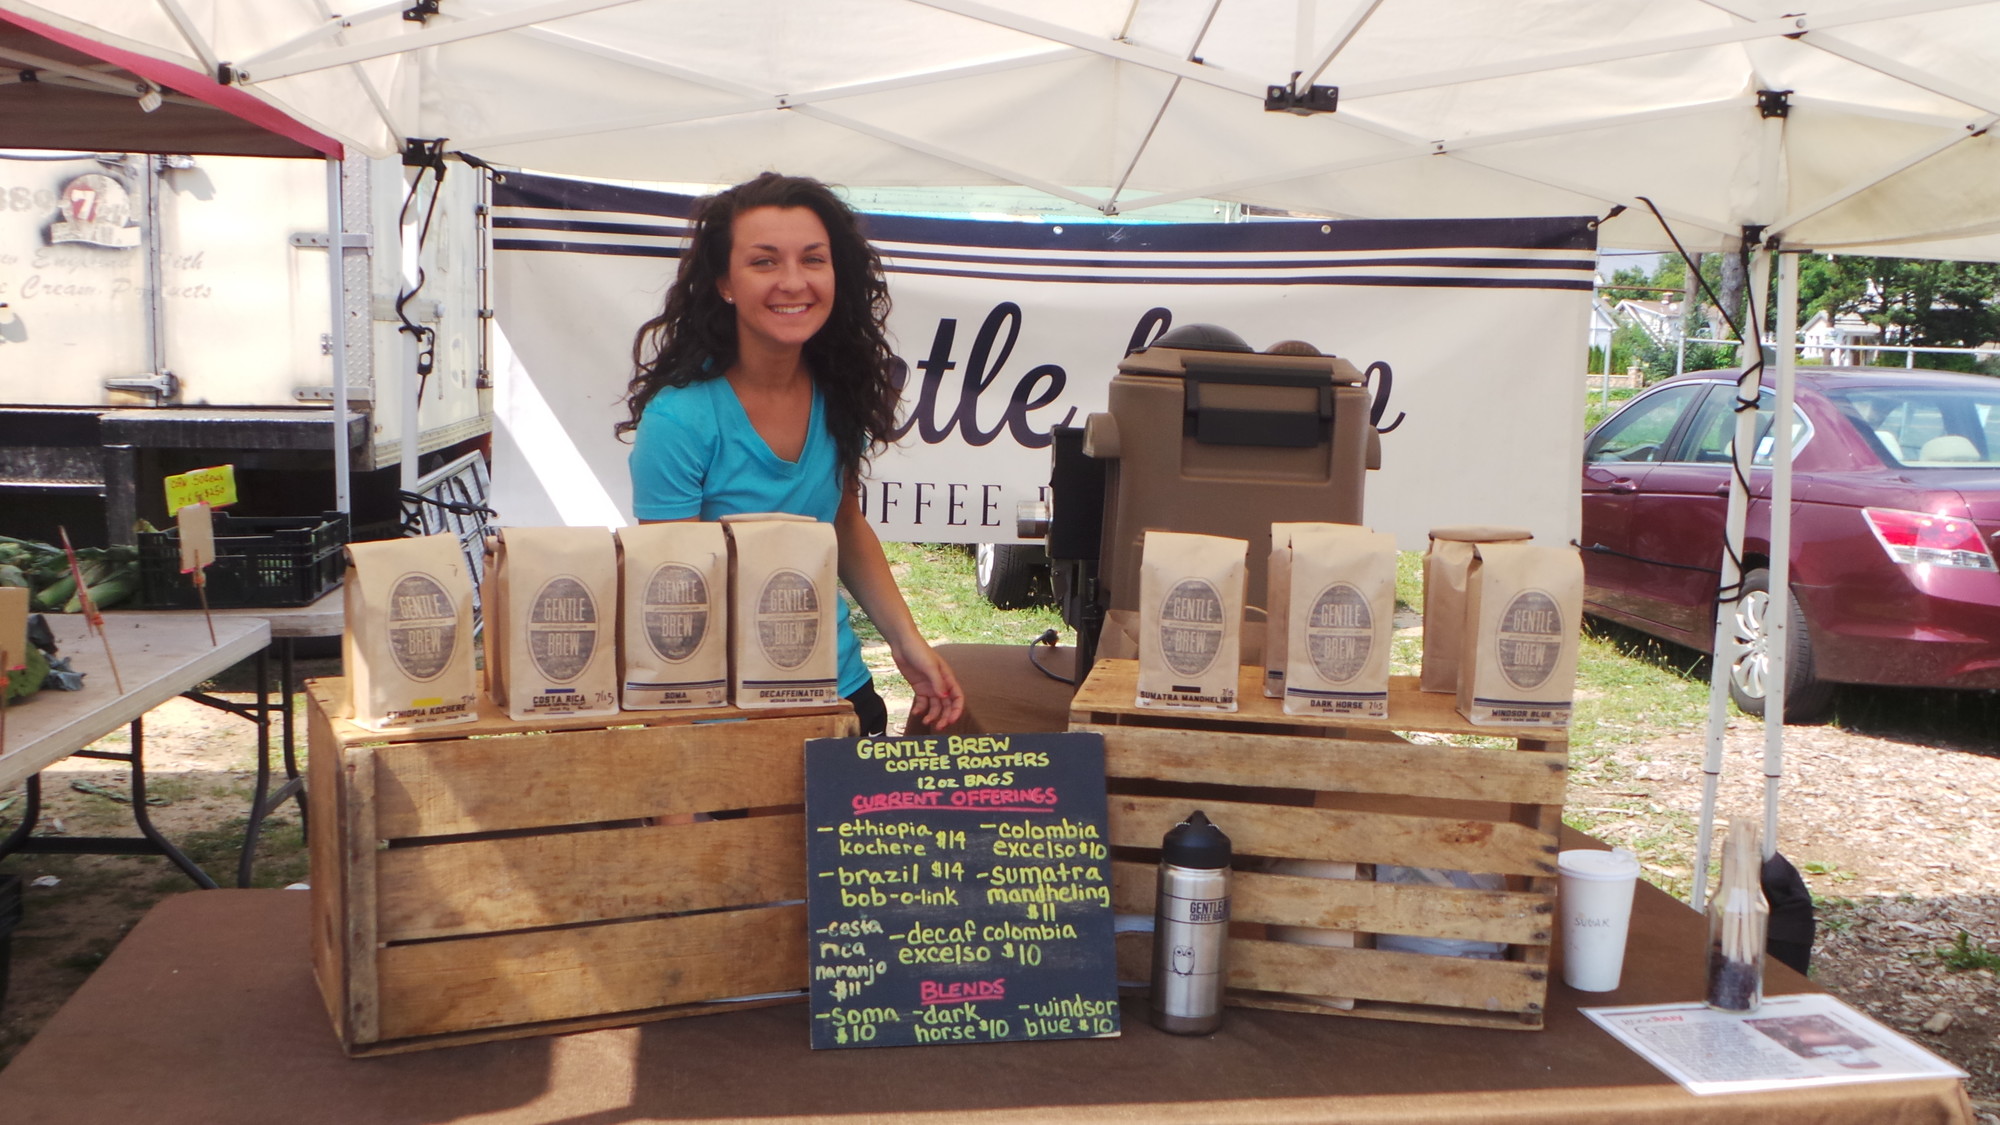 Gentle Brew brings its global coffee beans to the farmer’s market